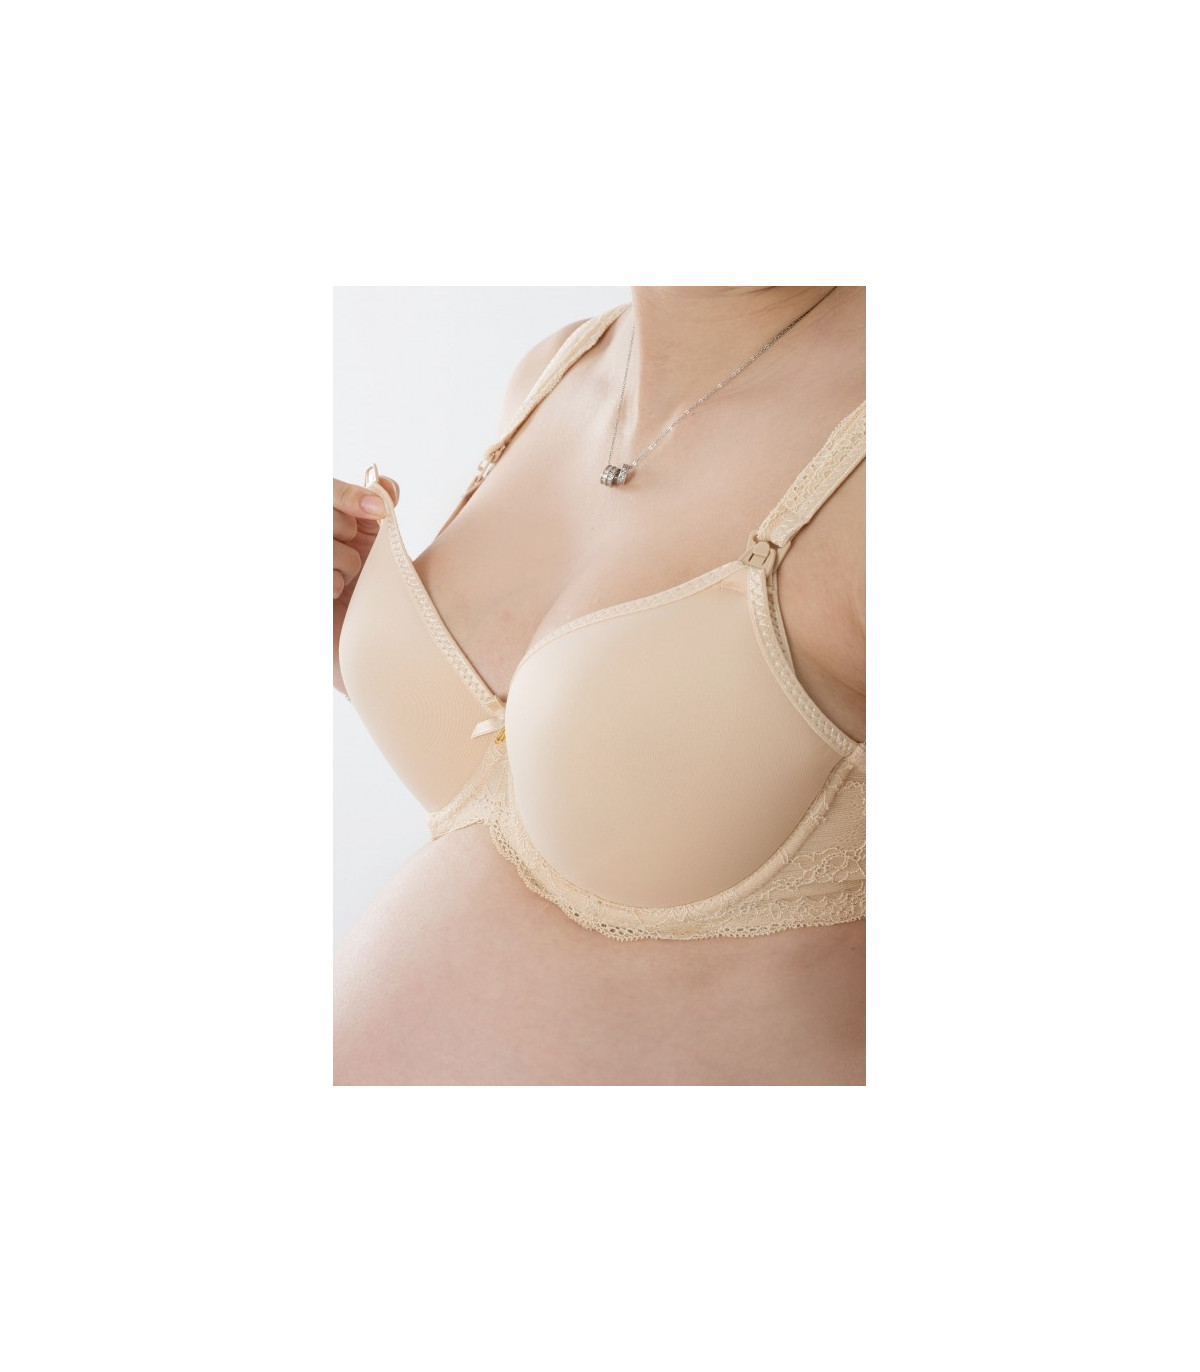 Nonwired nursing bra with padded cups